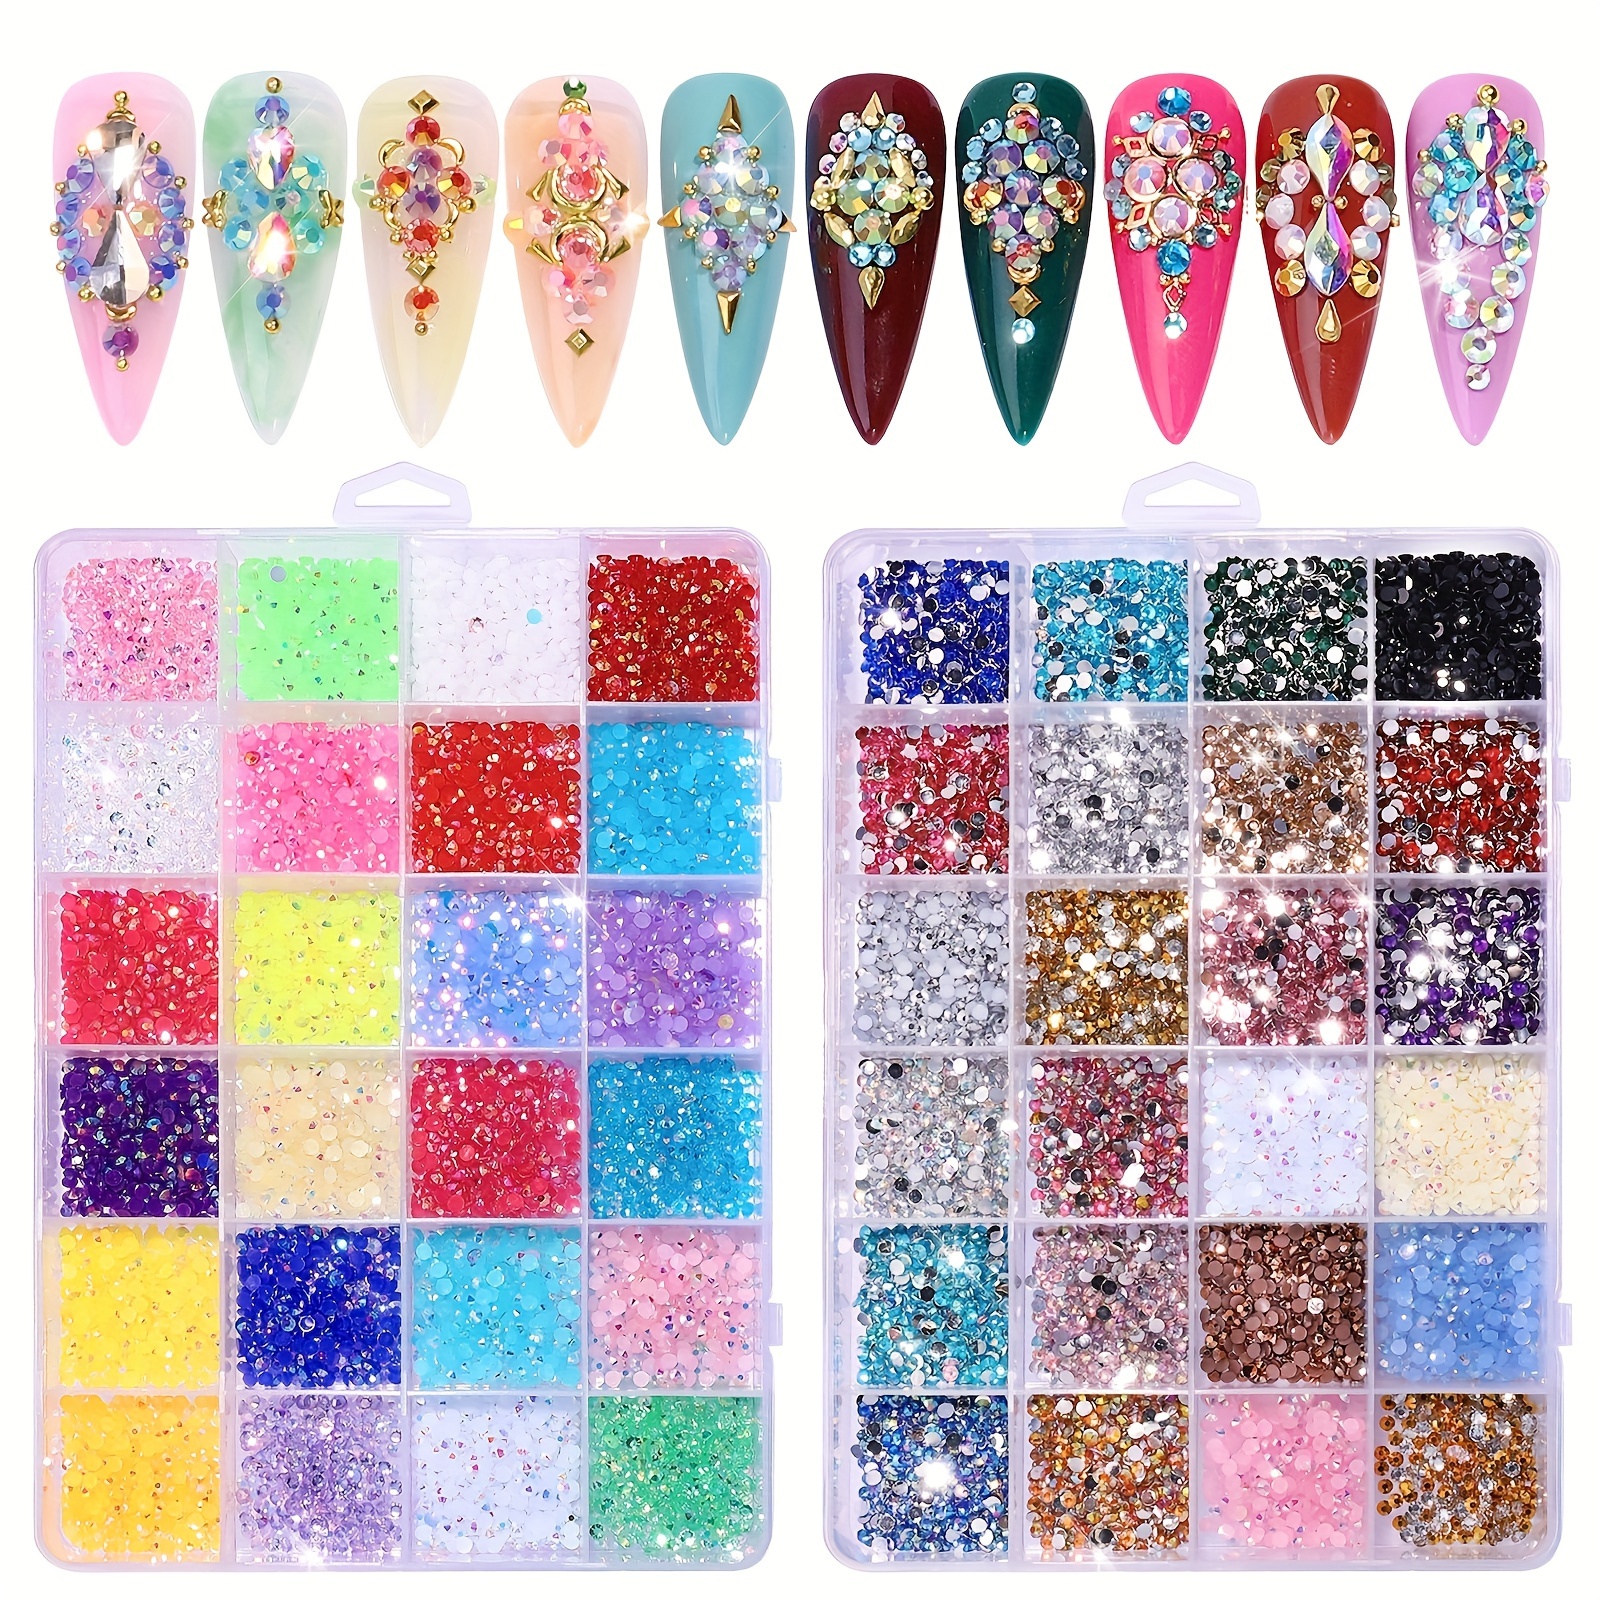 

24 Grids Nail Art Flatback Resin Rhinestones, Fluorescent Ab Crystal Gems, Diy Jewelry Accessories For Manicure Decoration For Music Festival